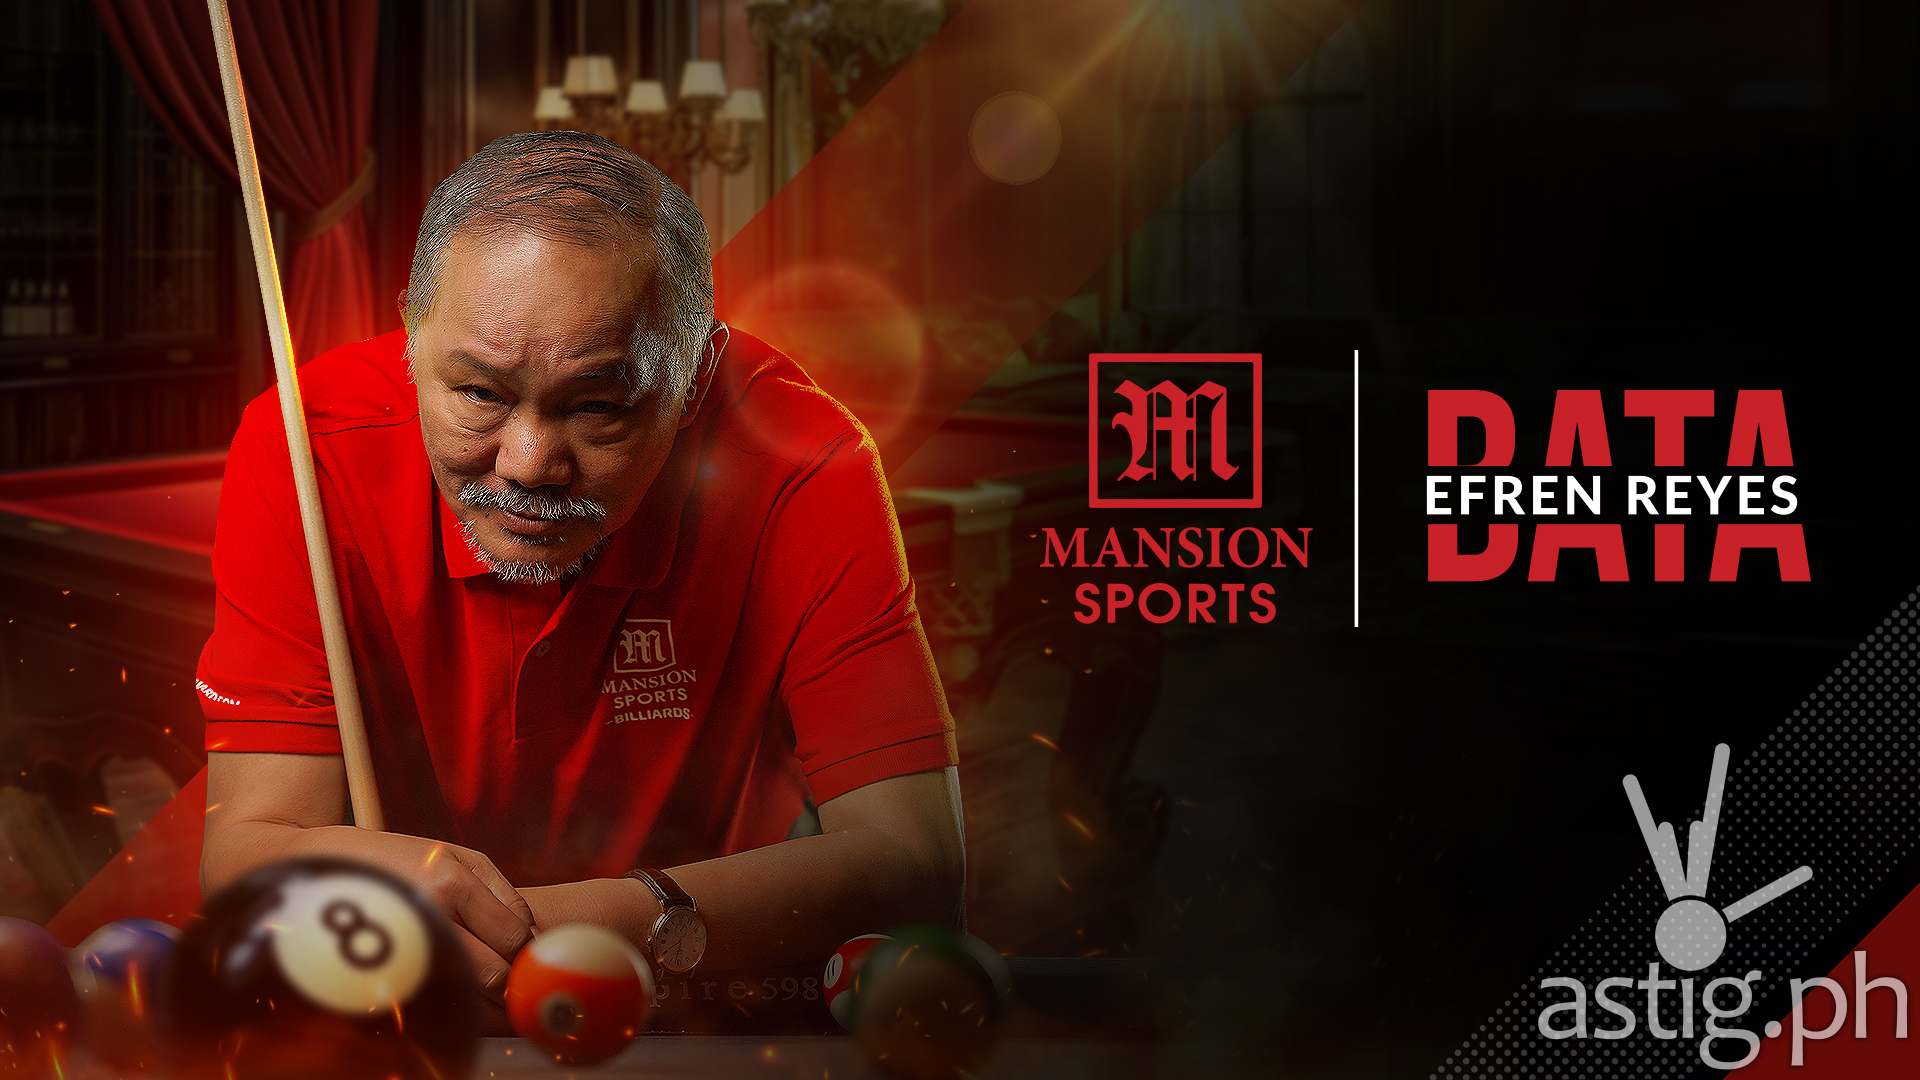 Efren 'Bata' Reyes signs partnership deal with Mansion Sports